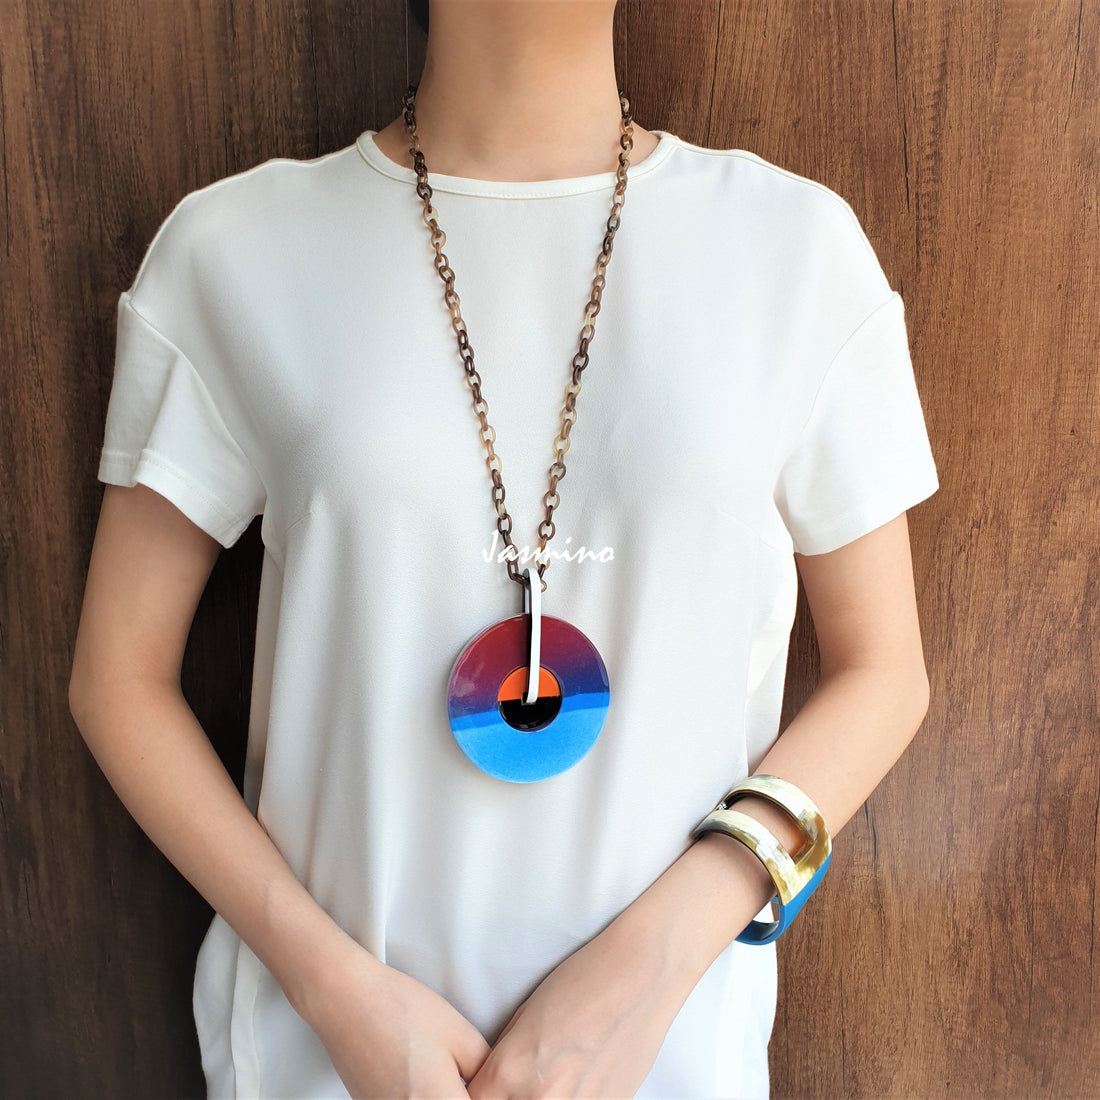 A model is wearing unique handmade rainbow pendant features a turquoise and purple colour made of natural buffalo horn